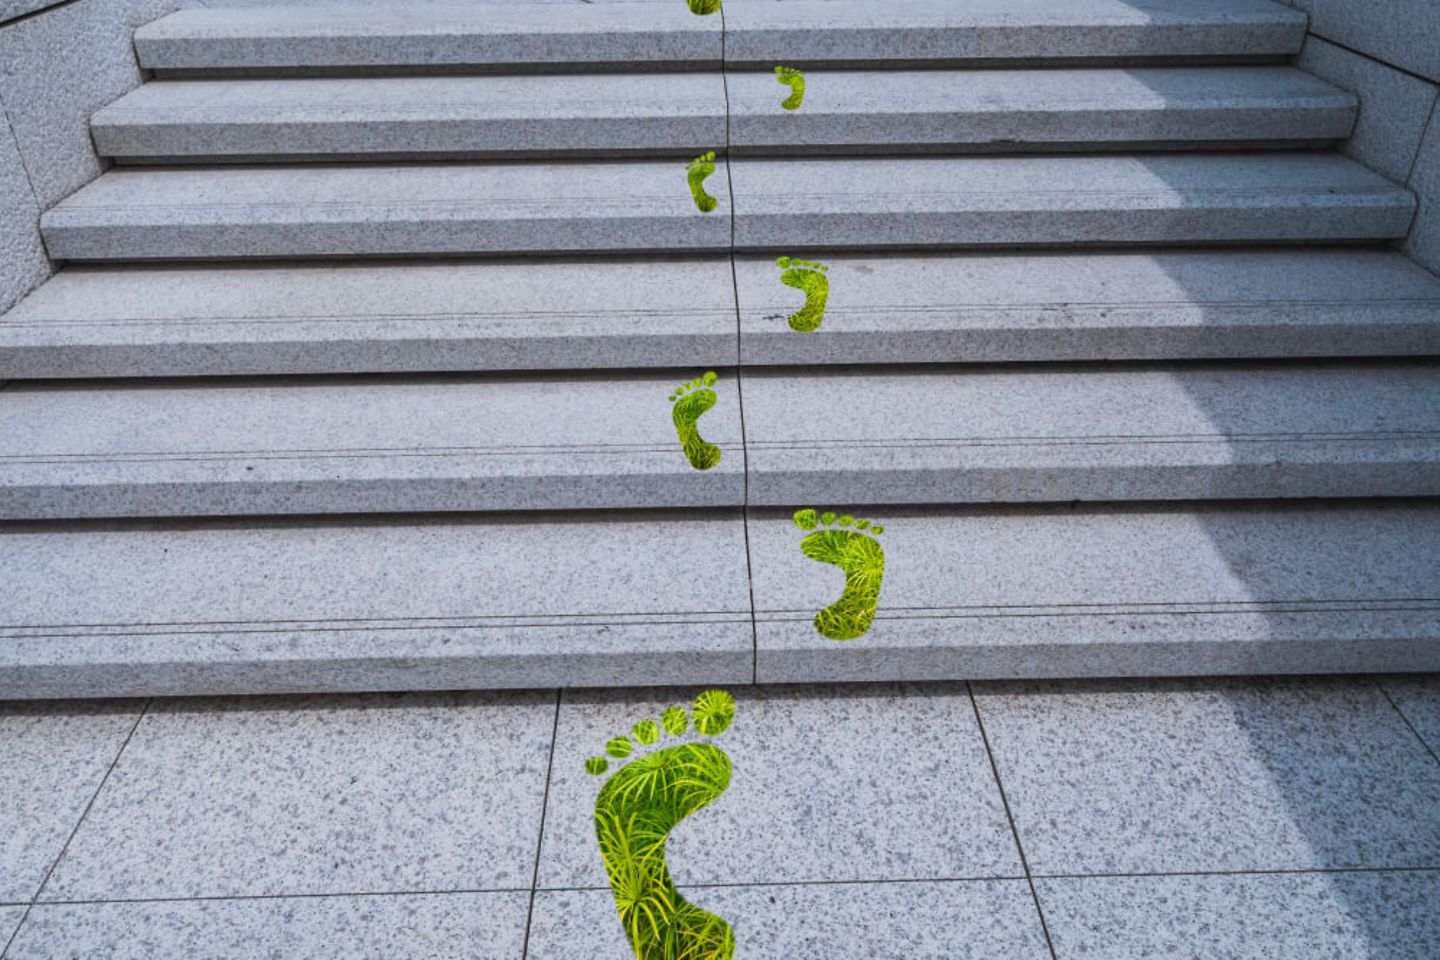 Green footprints on the steps symbolise the carbon footprint.